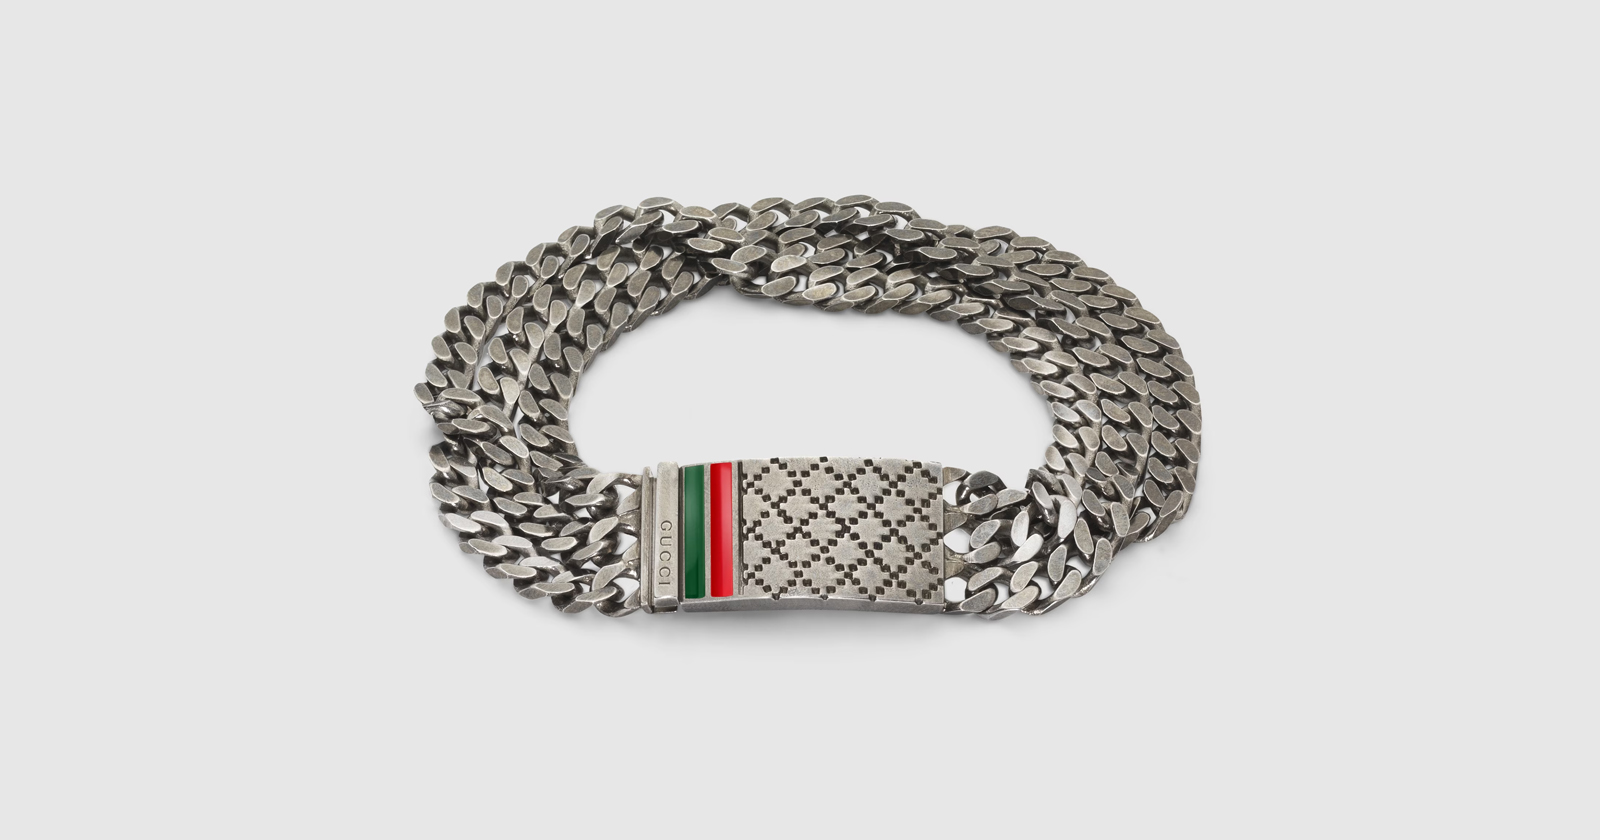 Gucci Mens Jewelry: Shop Online for Cufflinks, Keychains